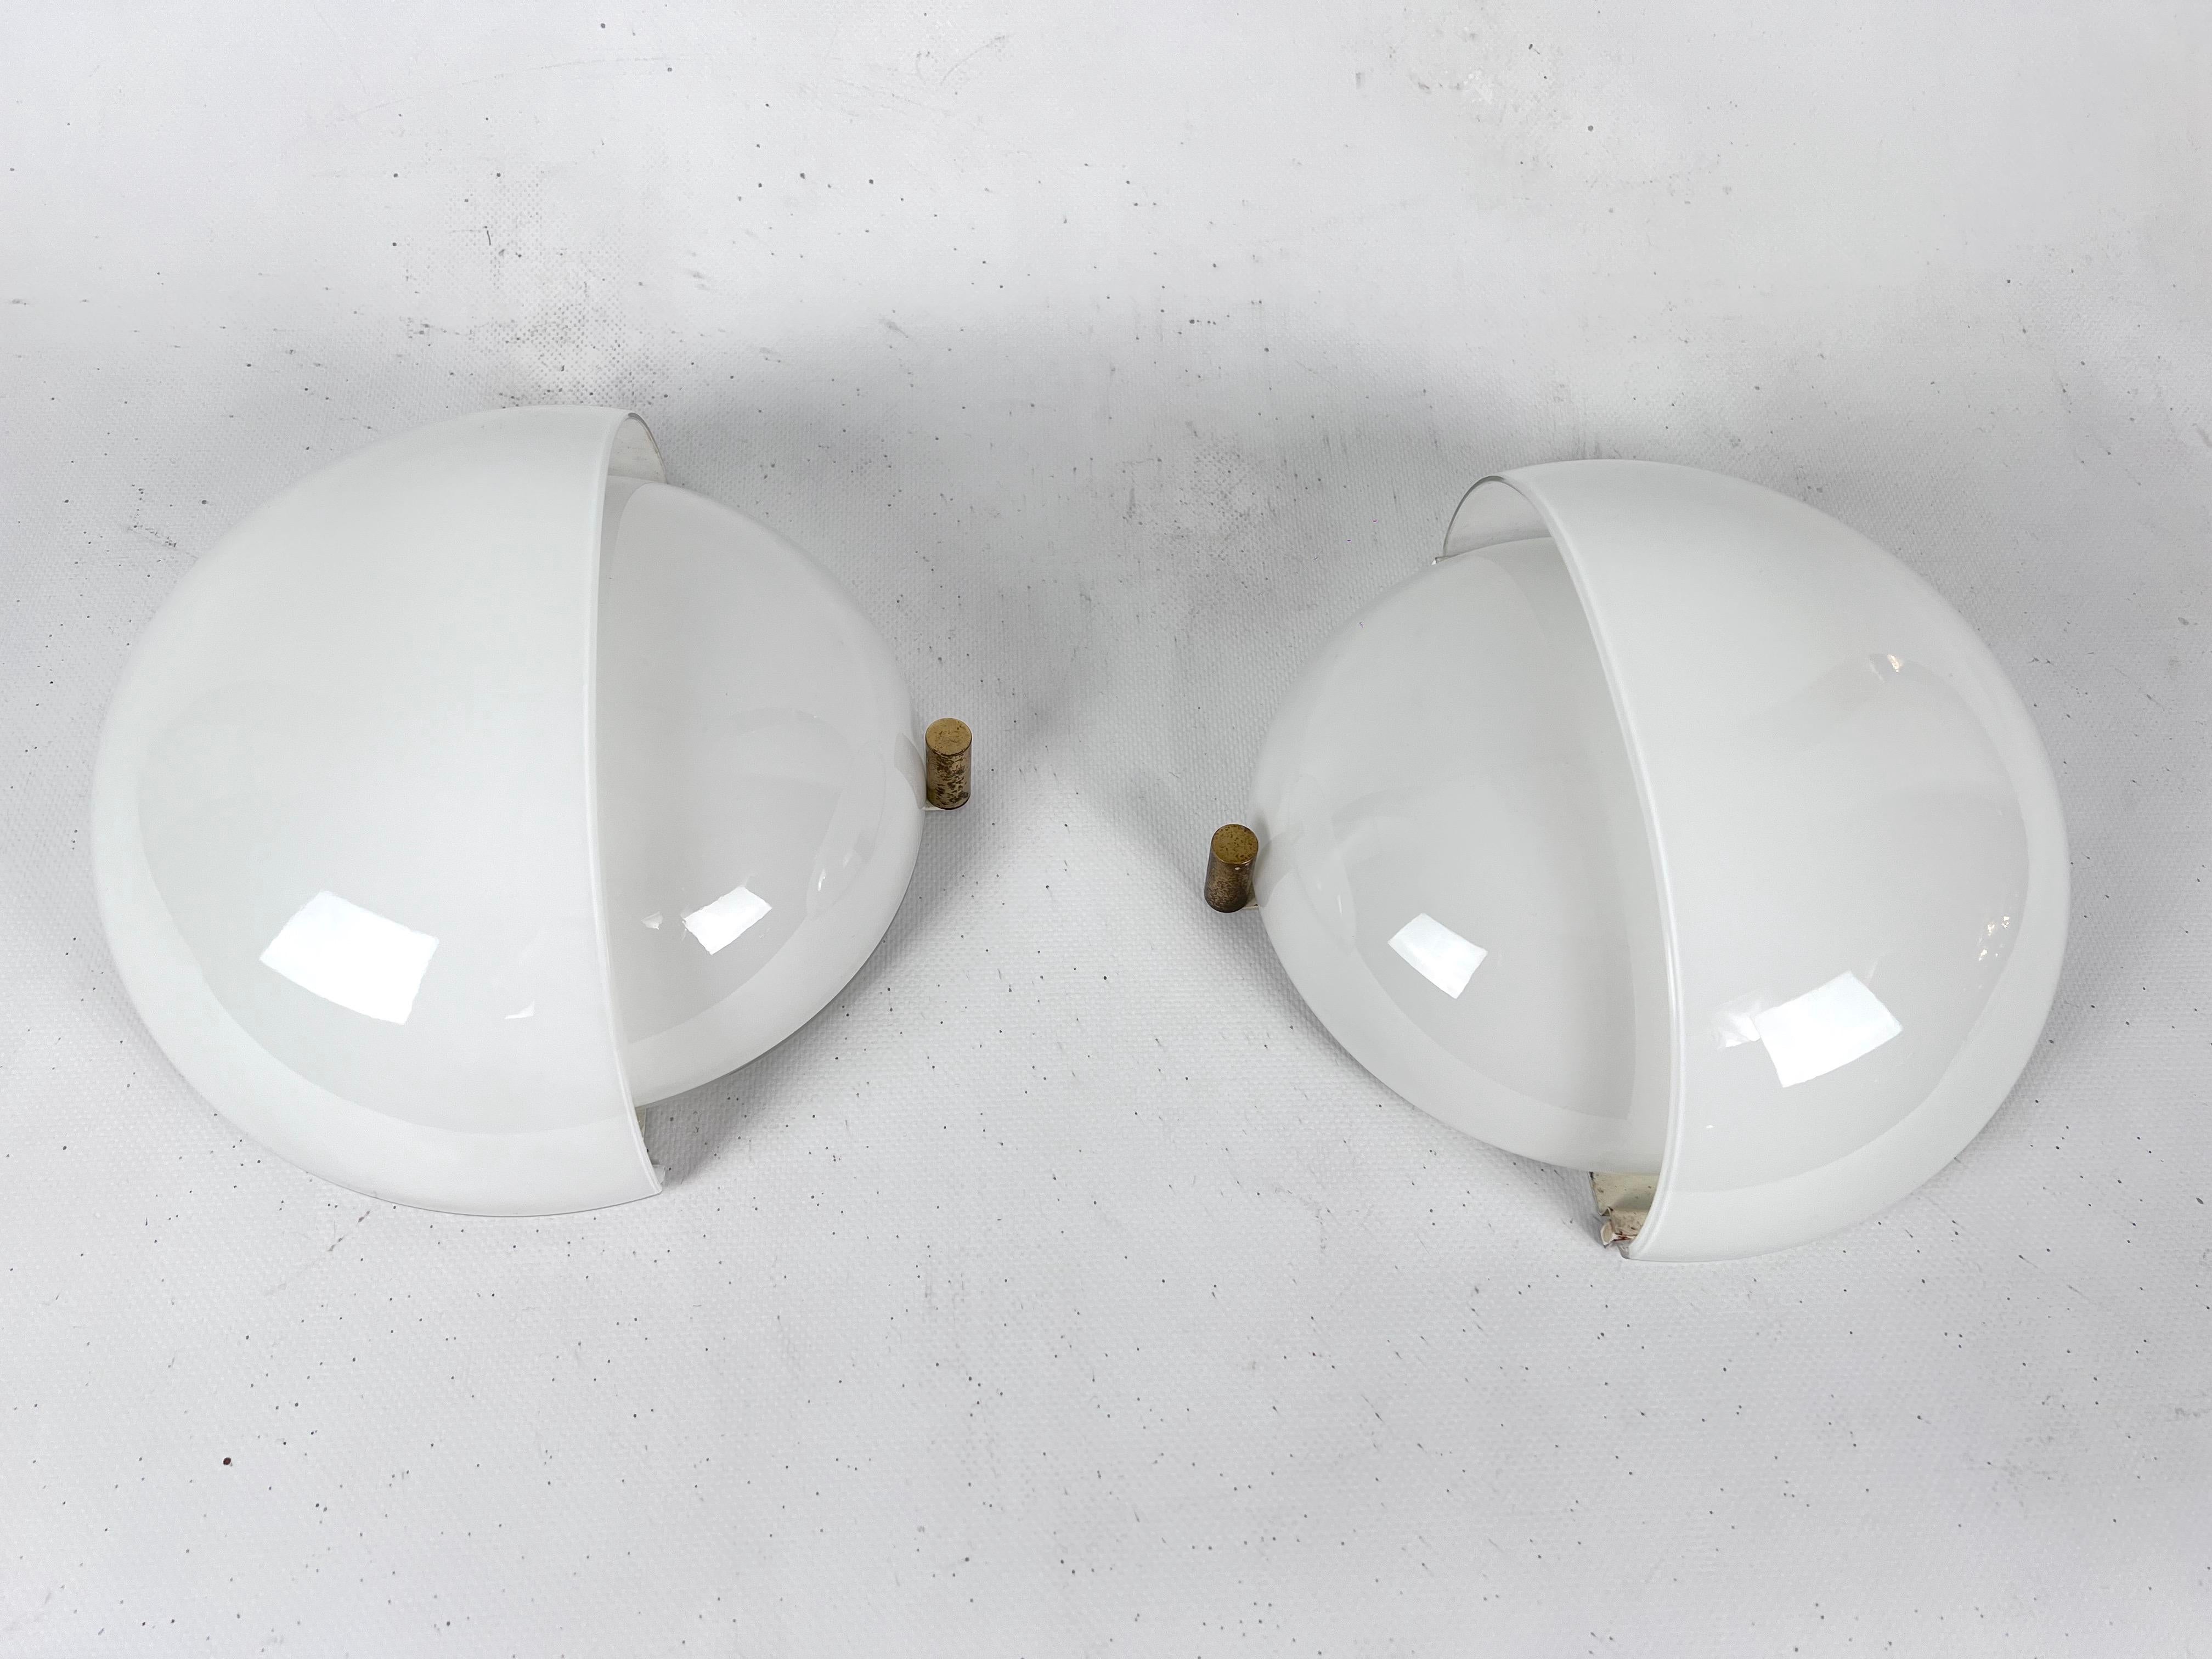 20th Century Rare Pair of Glass Mania Sconces by Vico Magistretti for Artemide, 1960s